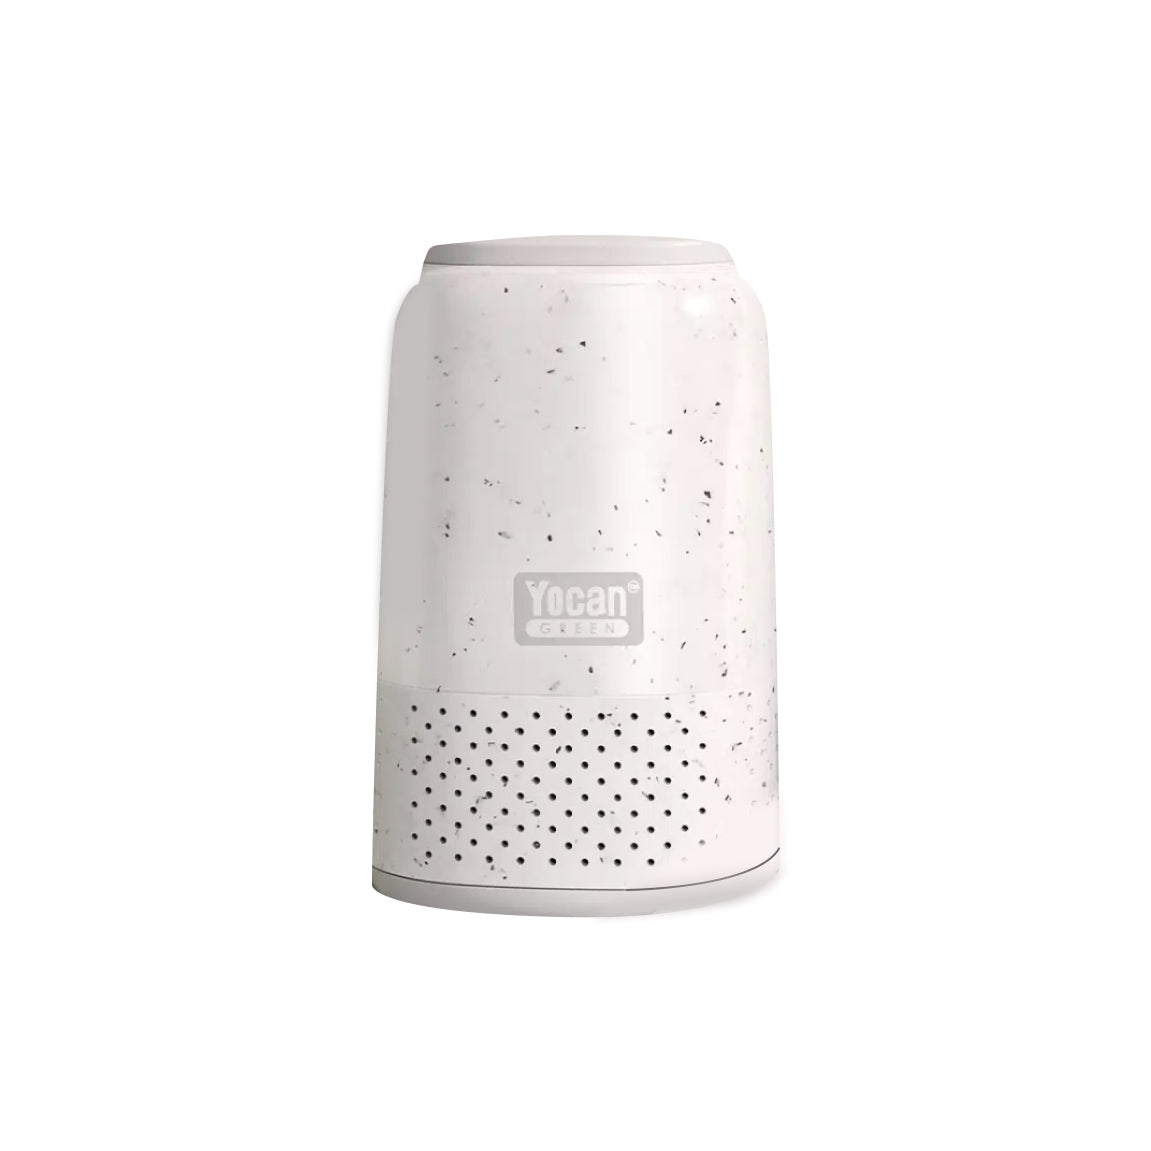 Yocan Green Invisibility Cloak Personal Air Filter - white